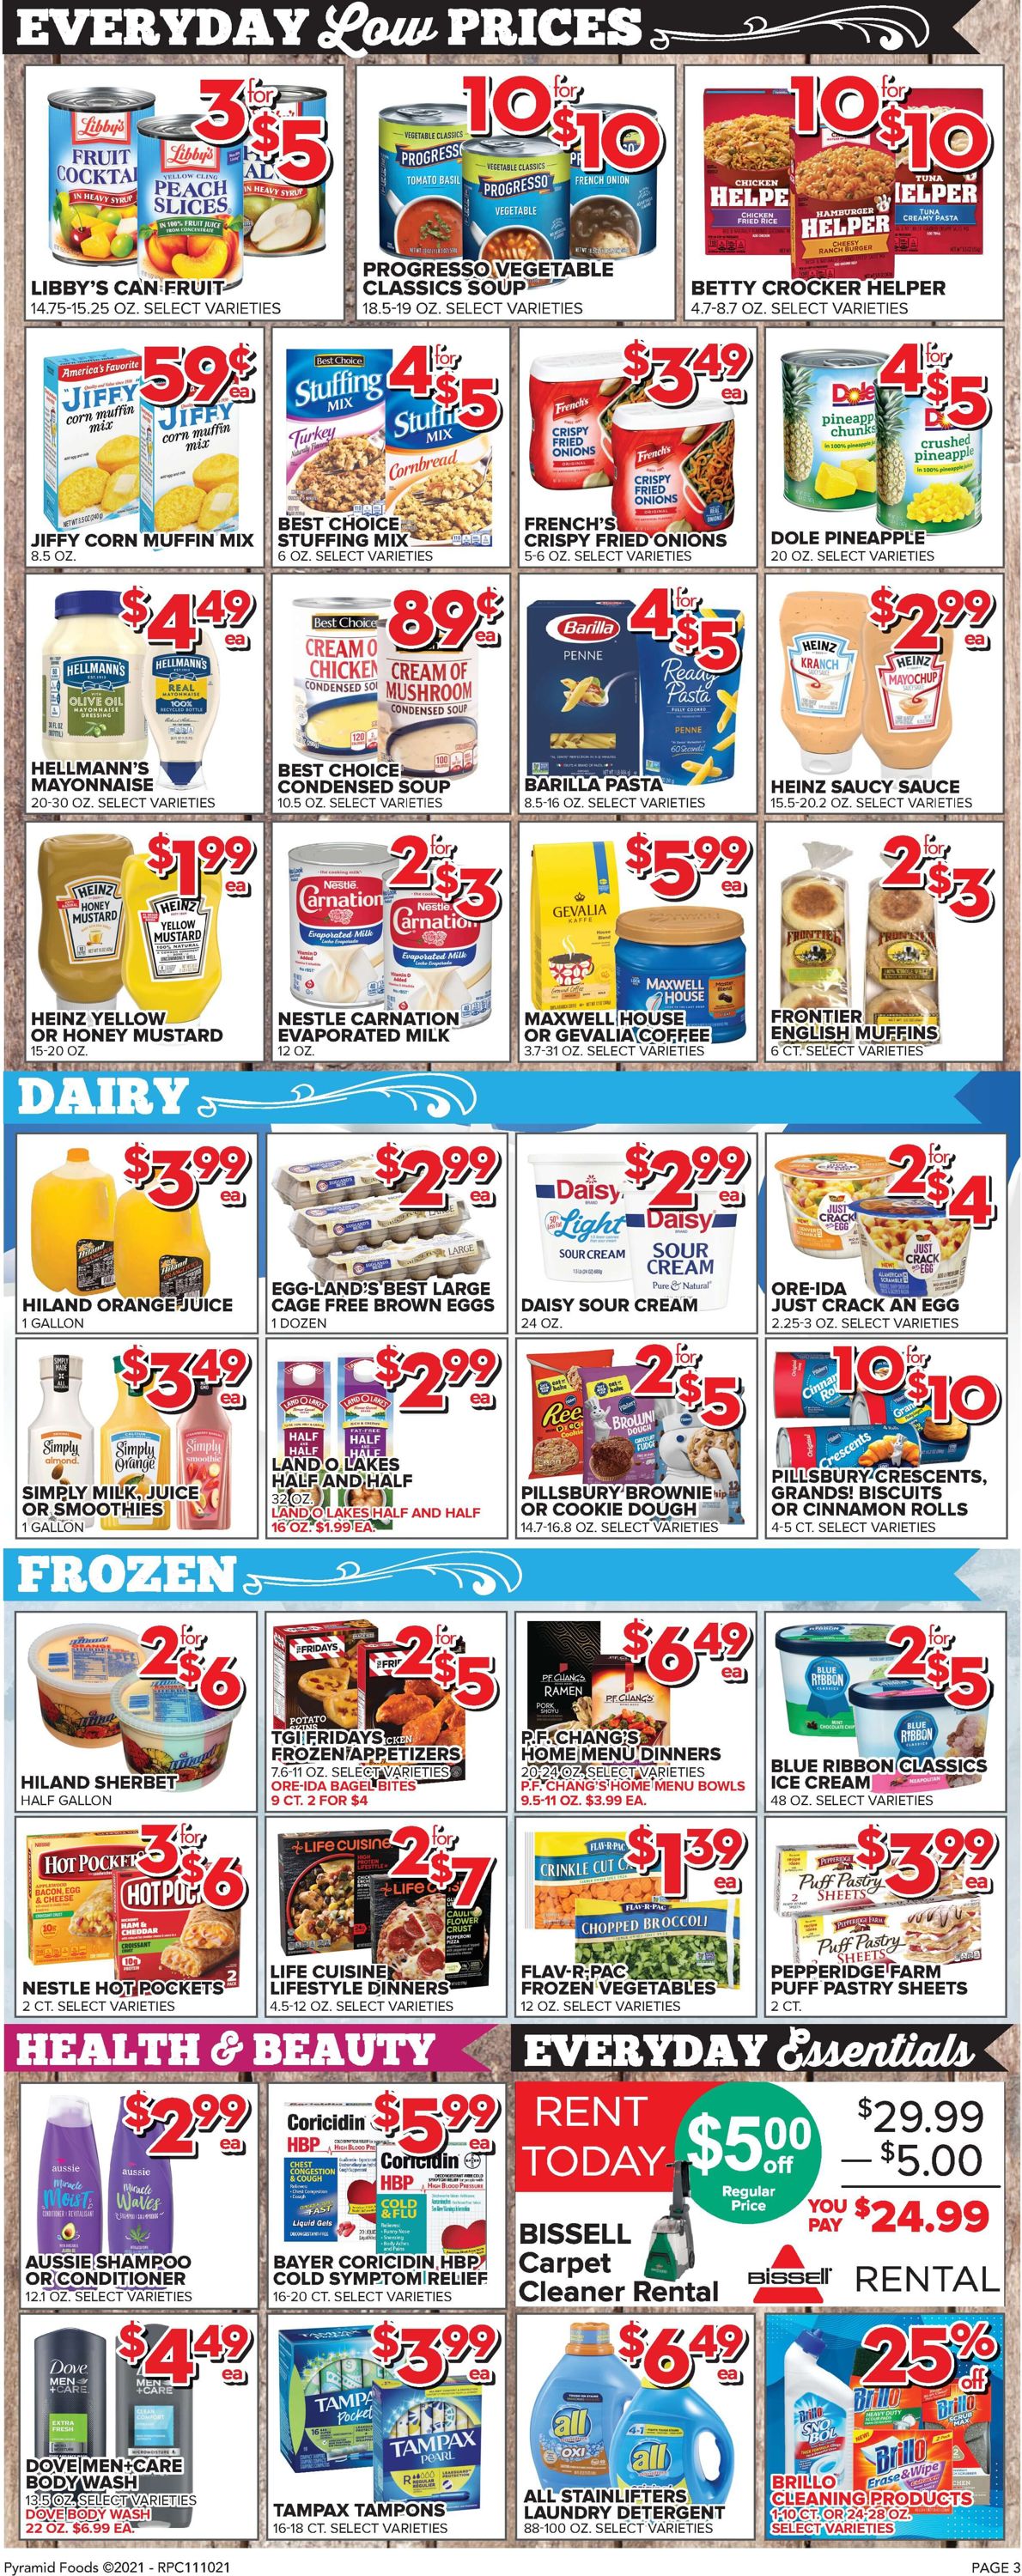 Price Cutter HOLIDAY 2021 Weekly Ad Circular - valid 11/10-11/16/2021 (Page 3)